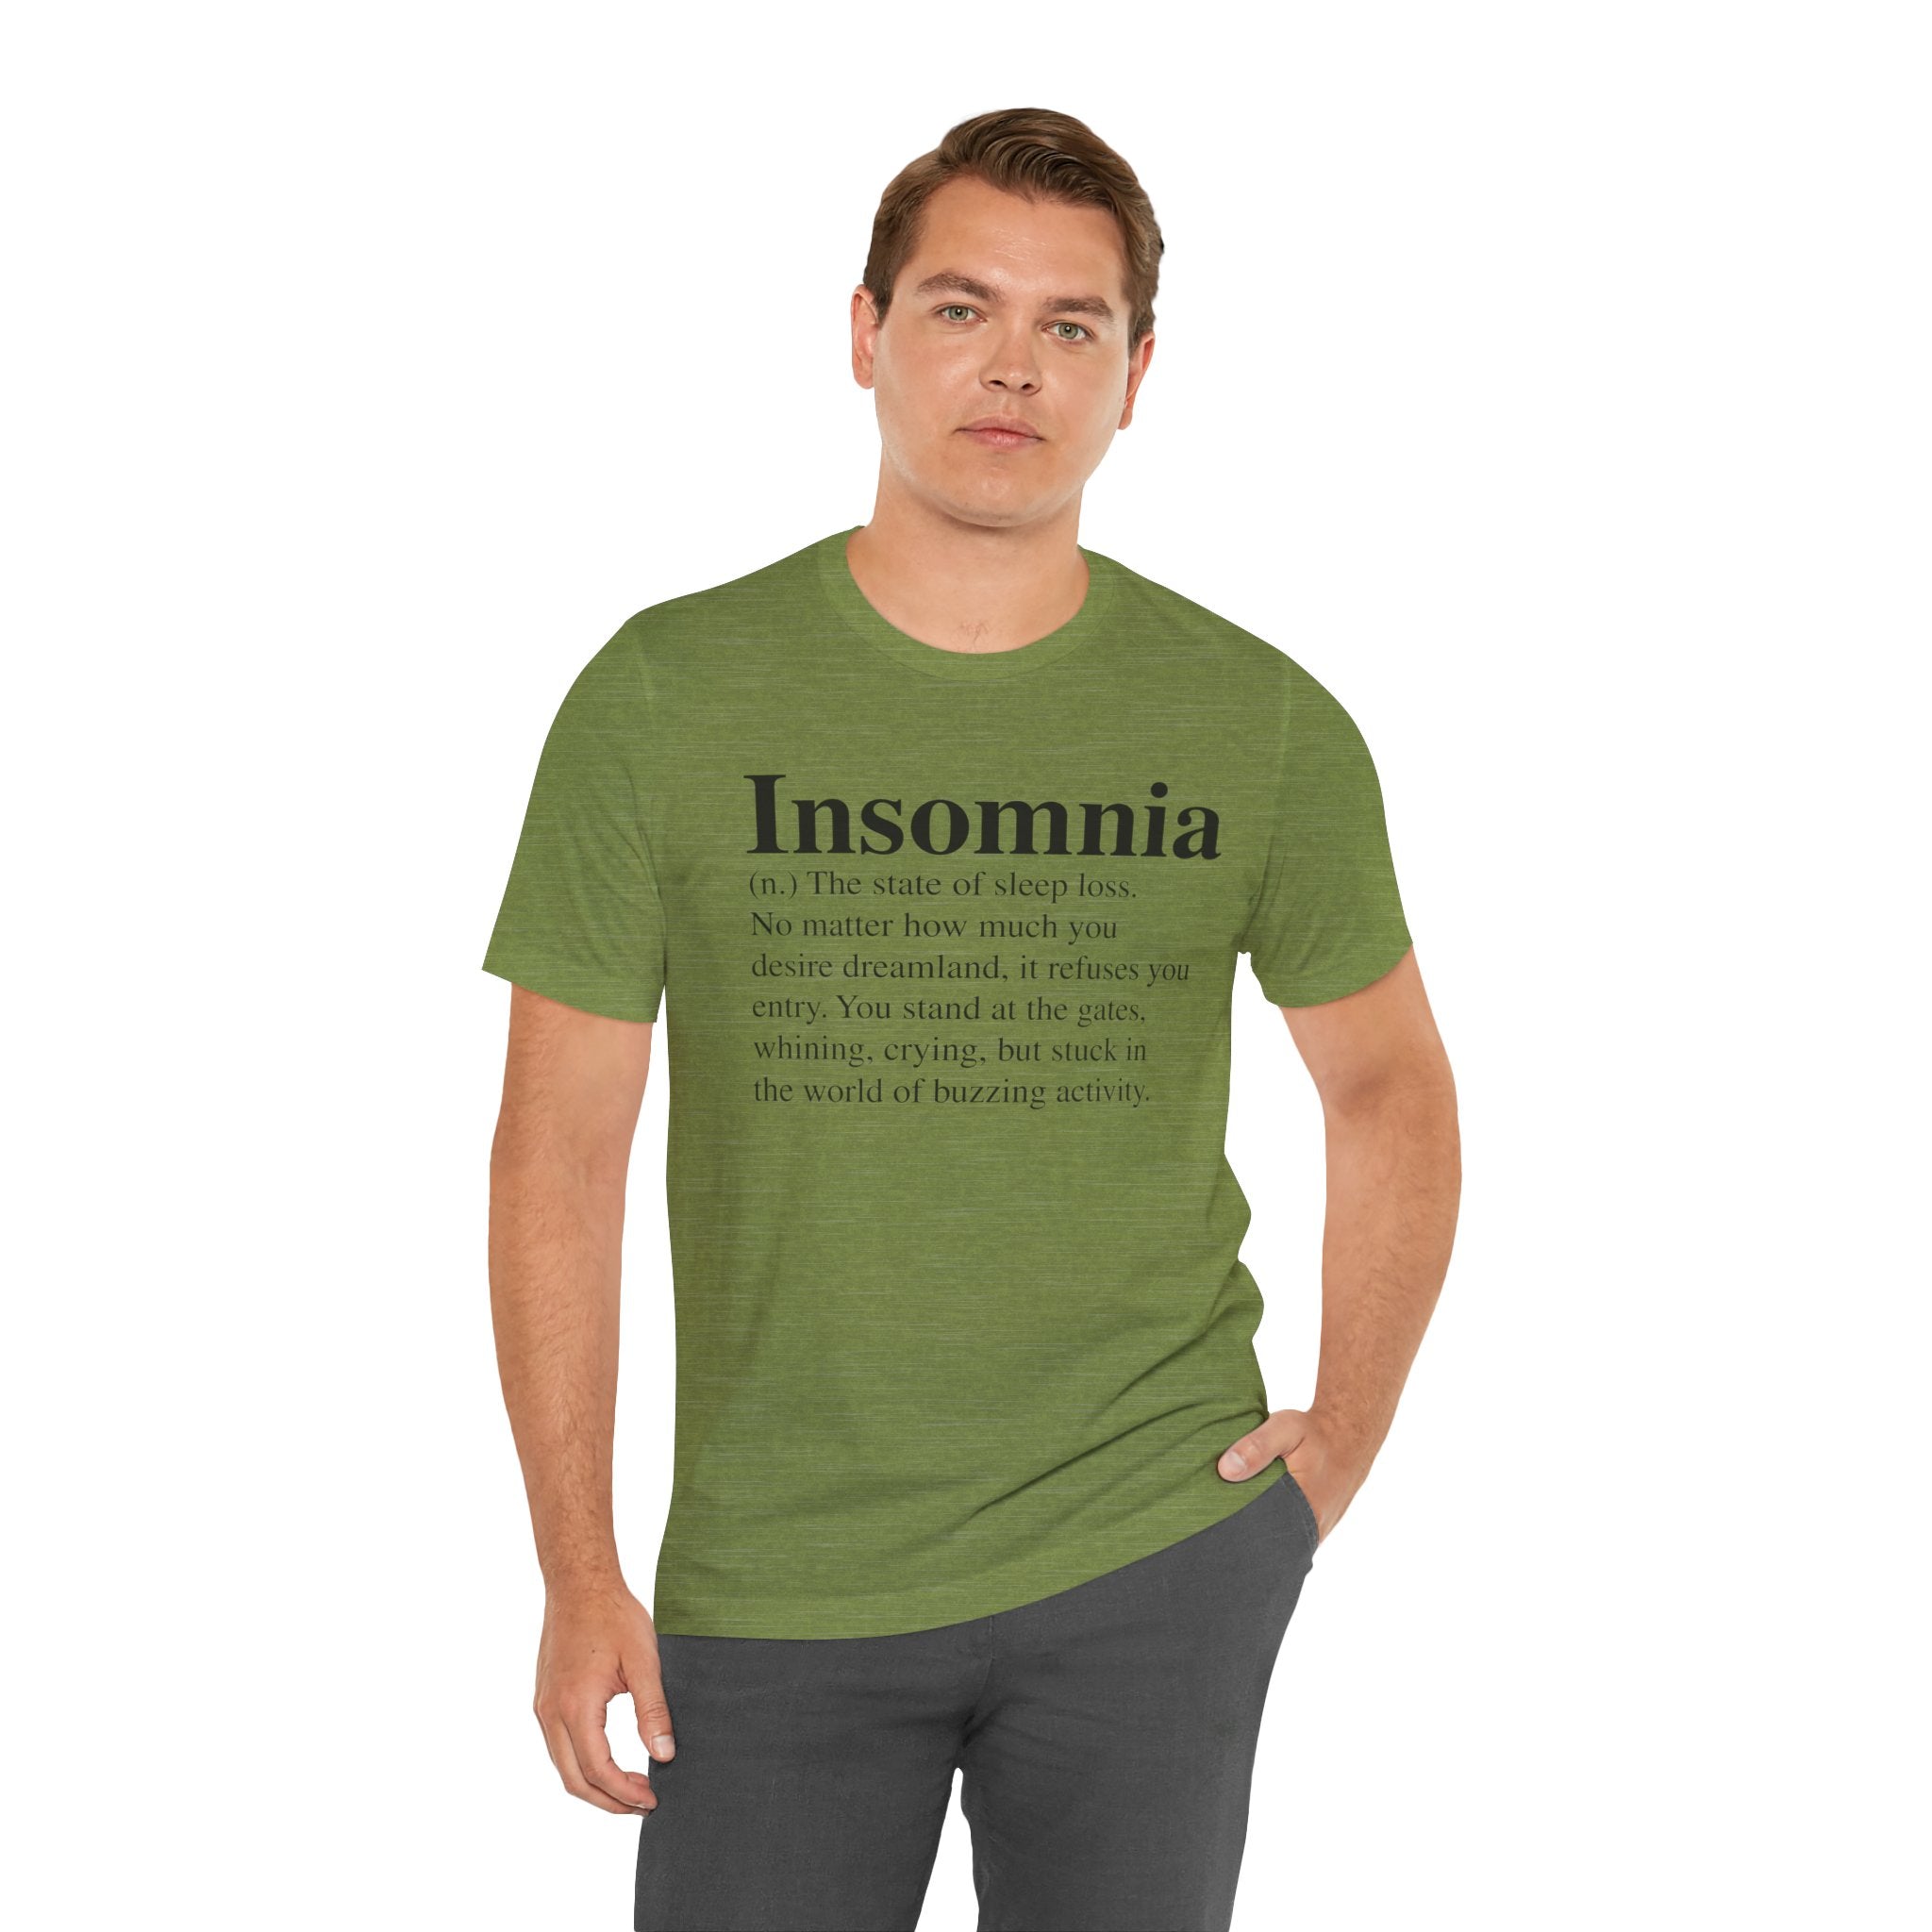 Man in an Insomnia T-Shirt, standing with one hand on his hip.